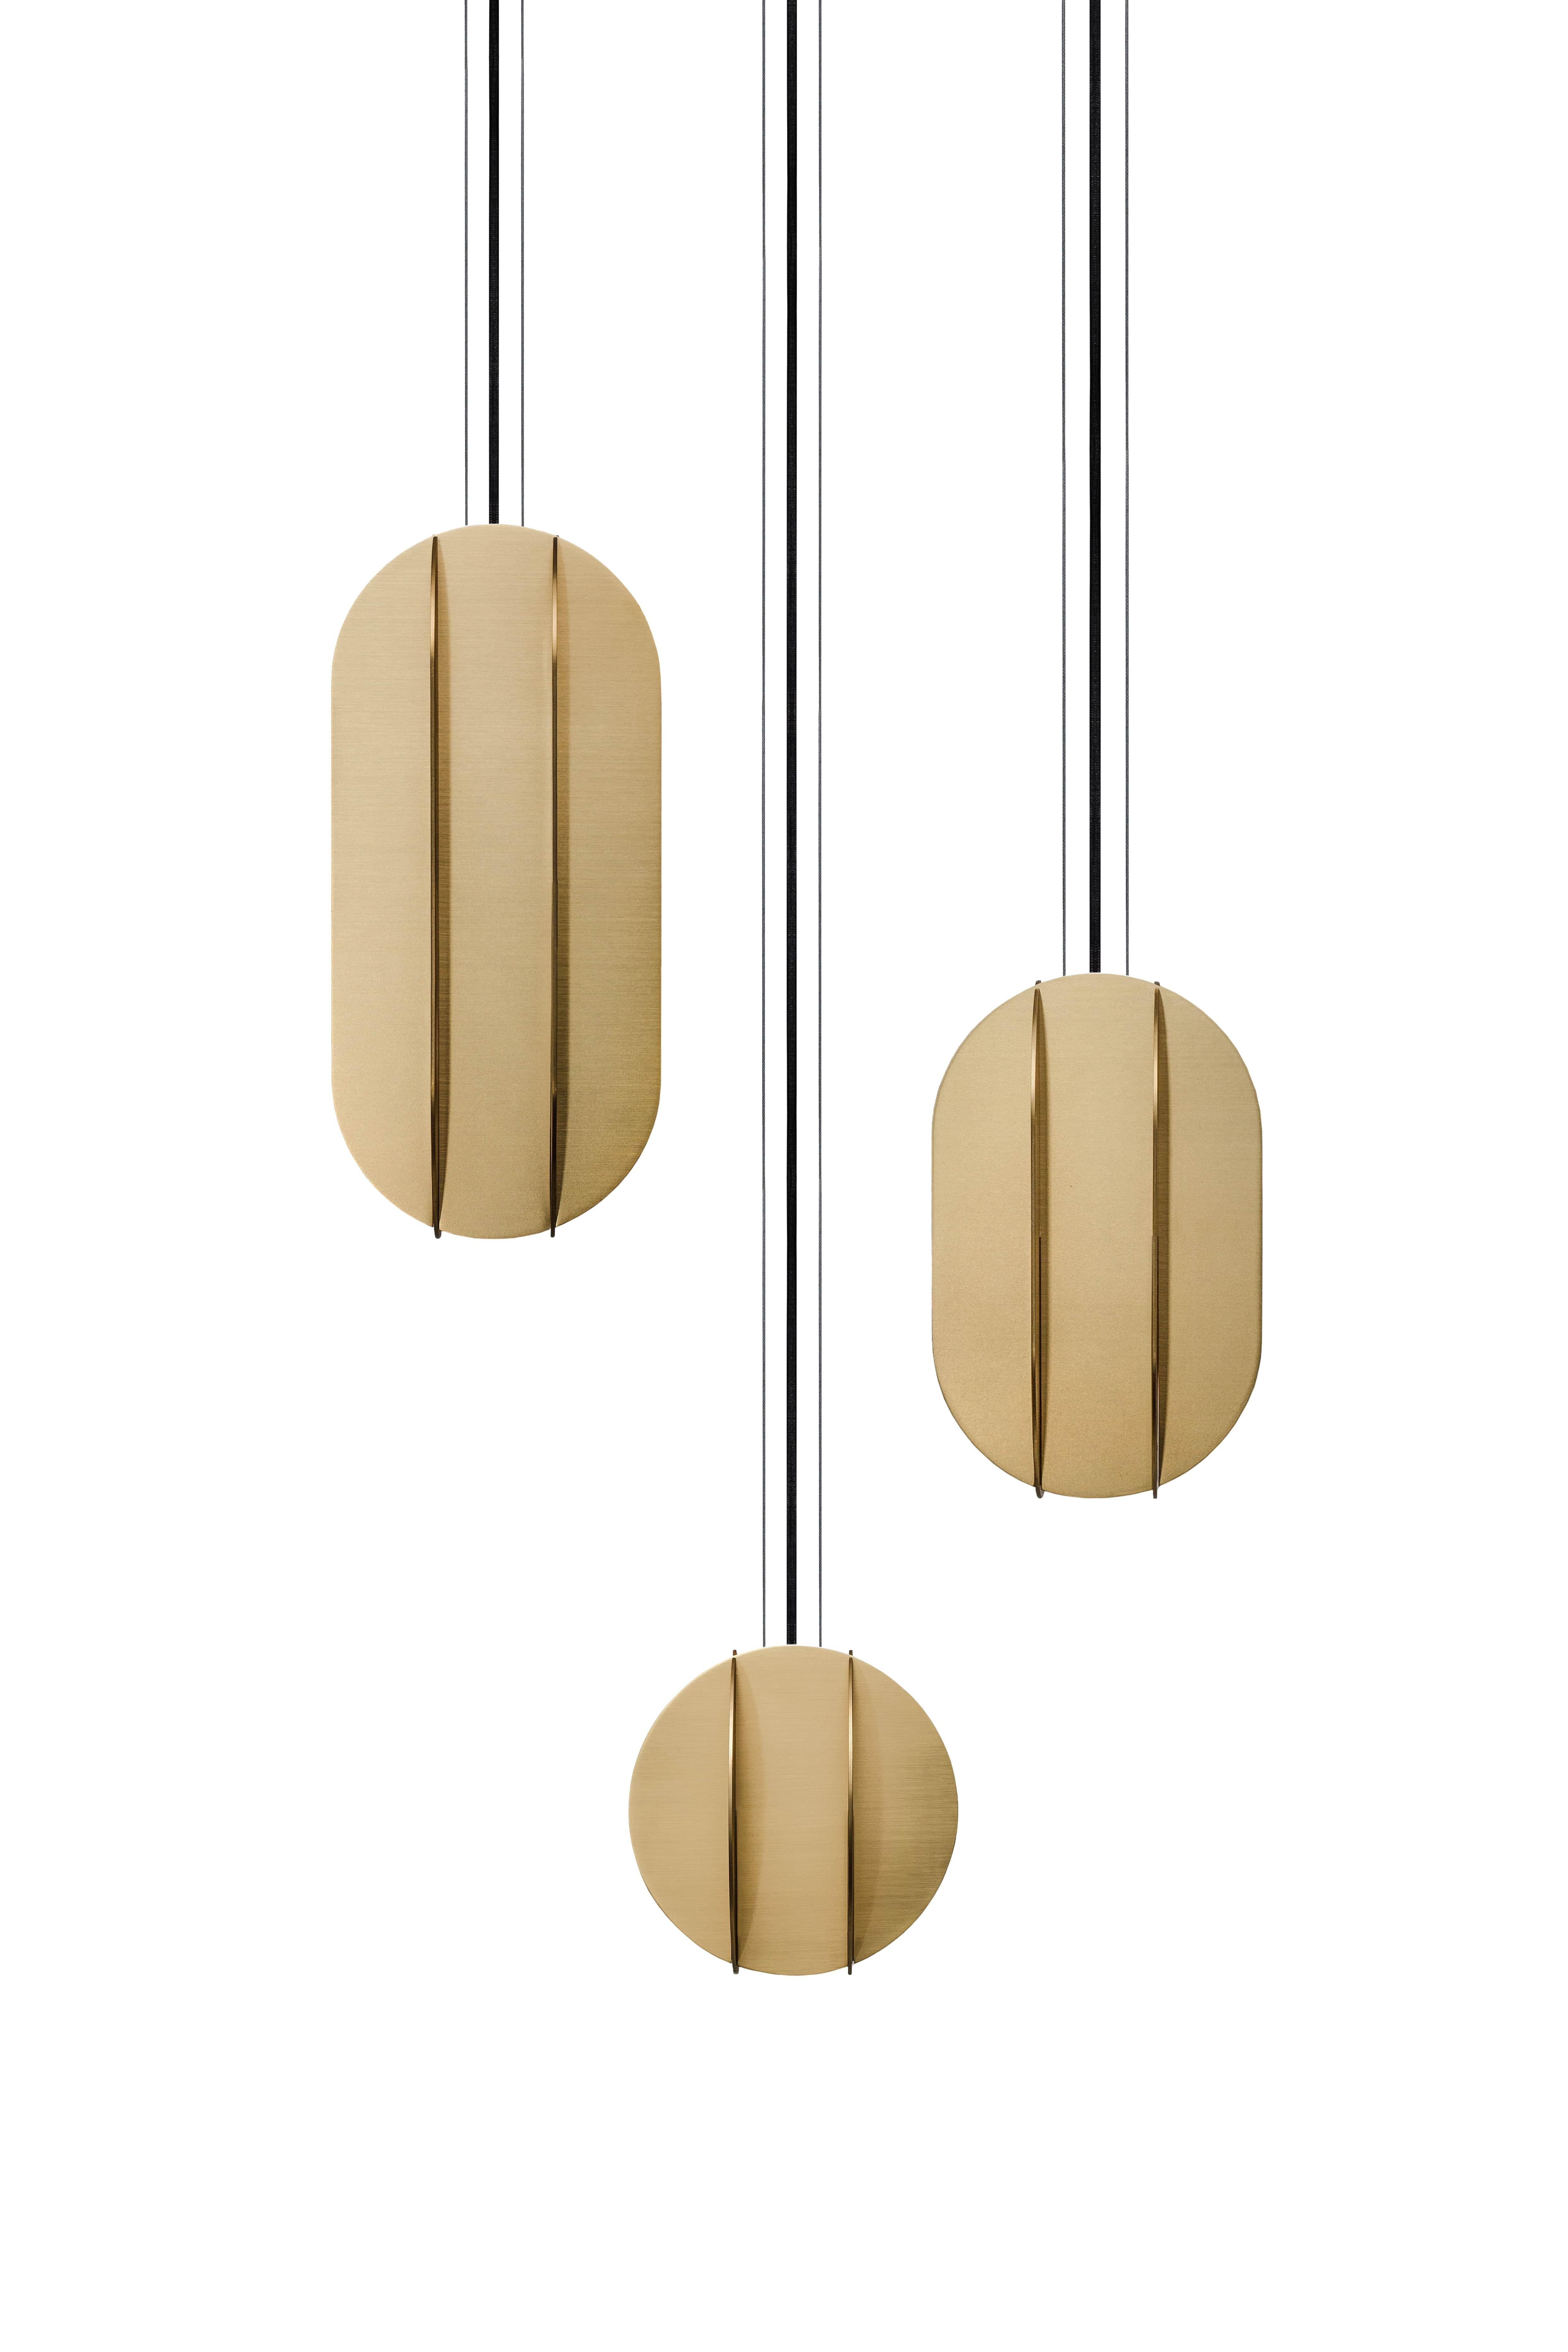 Contemporary Pendant Lamp EL Lamp small CS3 by NOOM in Stainless Steel 6